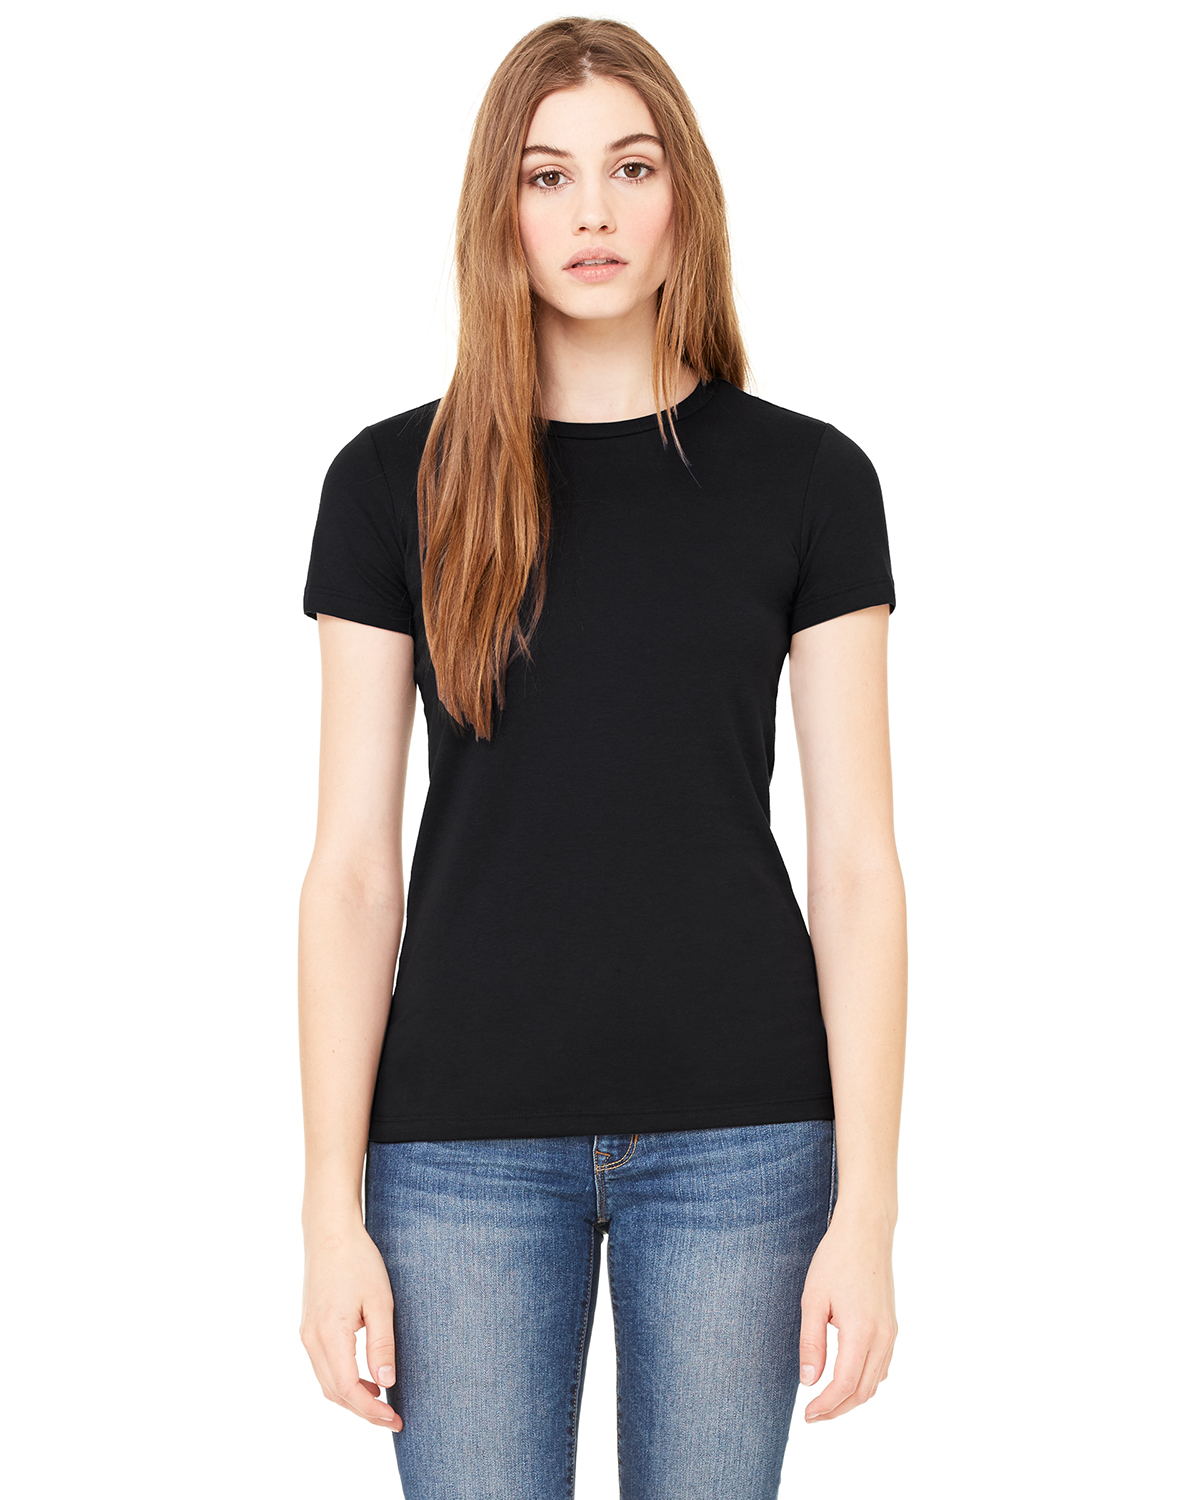 Canvas 6650 - Ladies' Poly/Cotton Short-Sleeve Tee